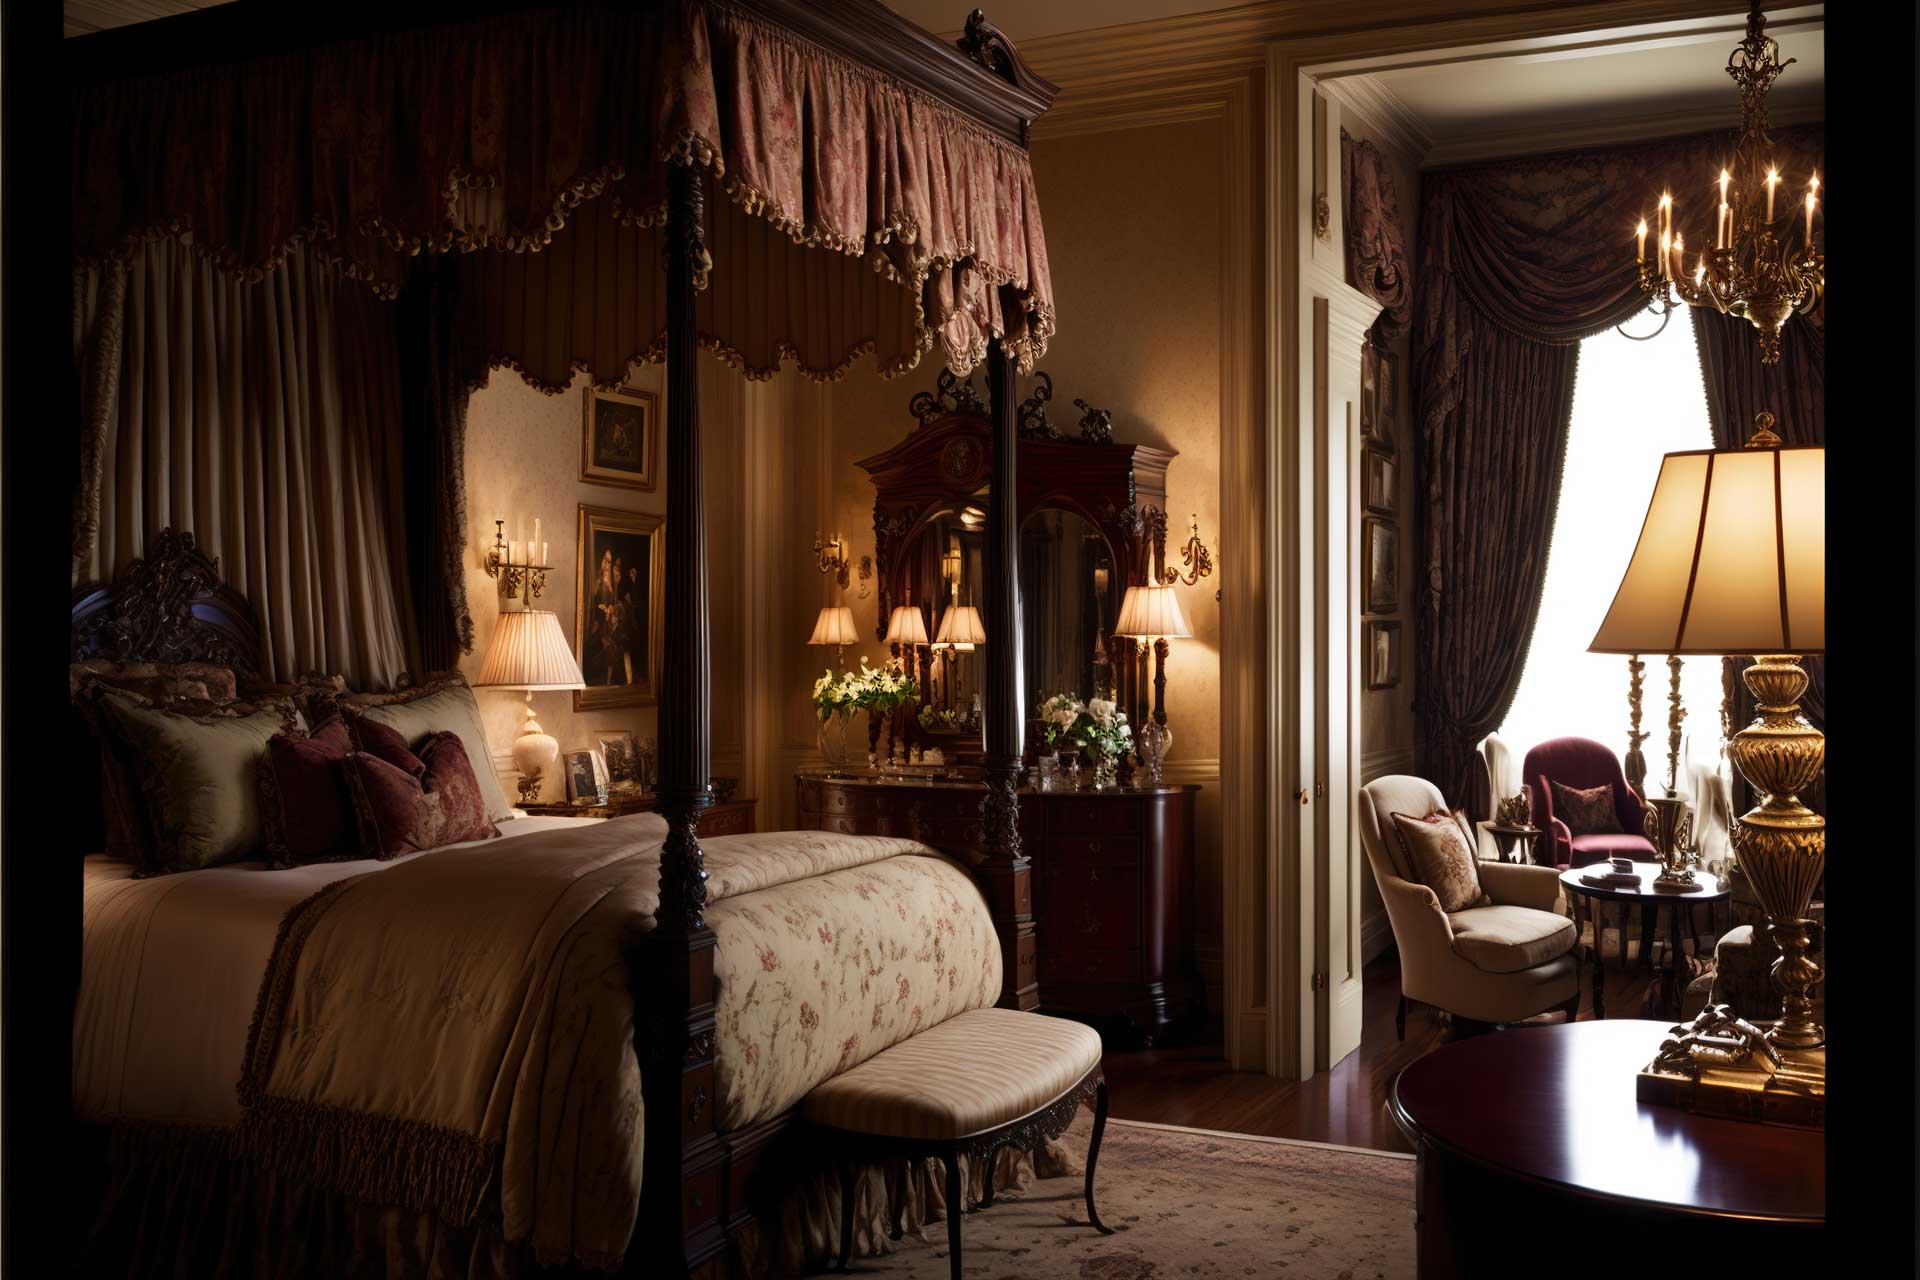 Grand Bedroom With Antique Furnishings